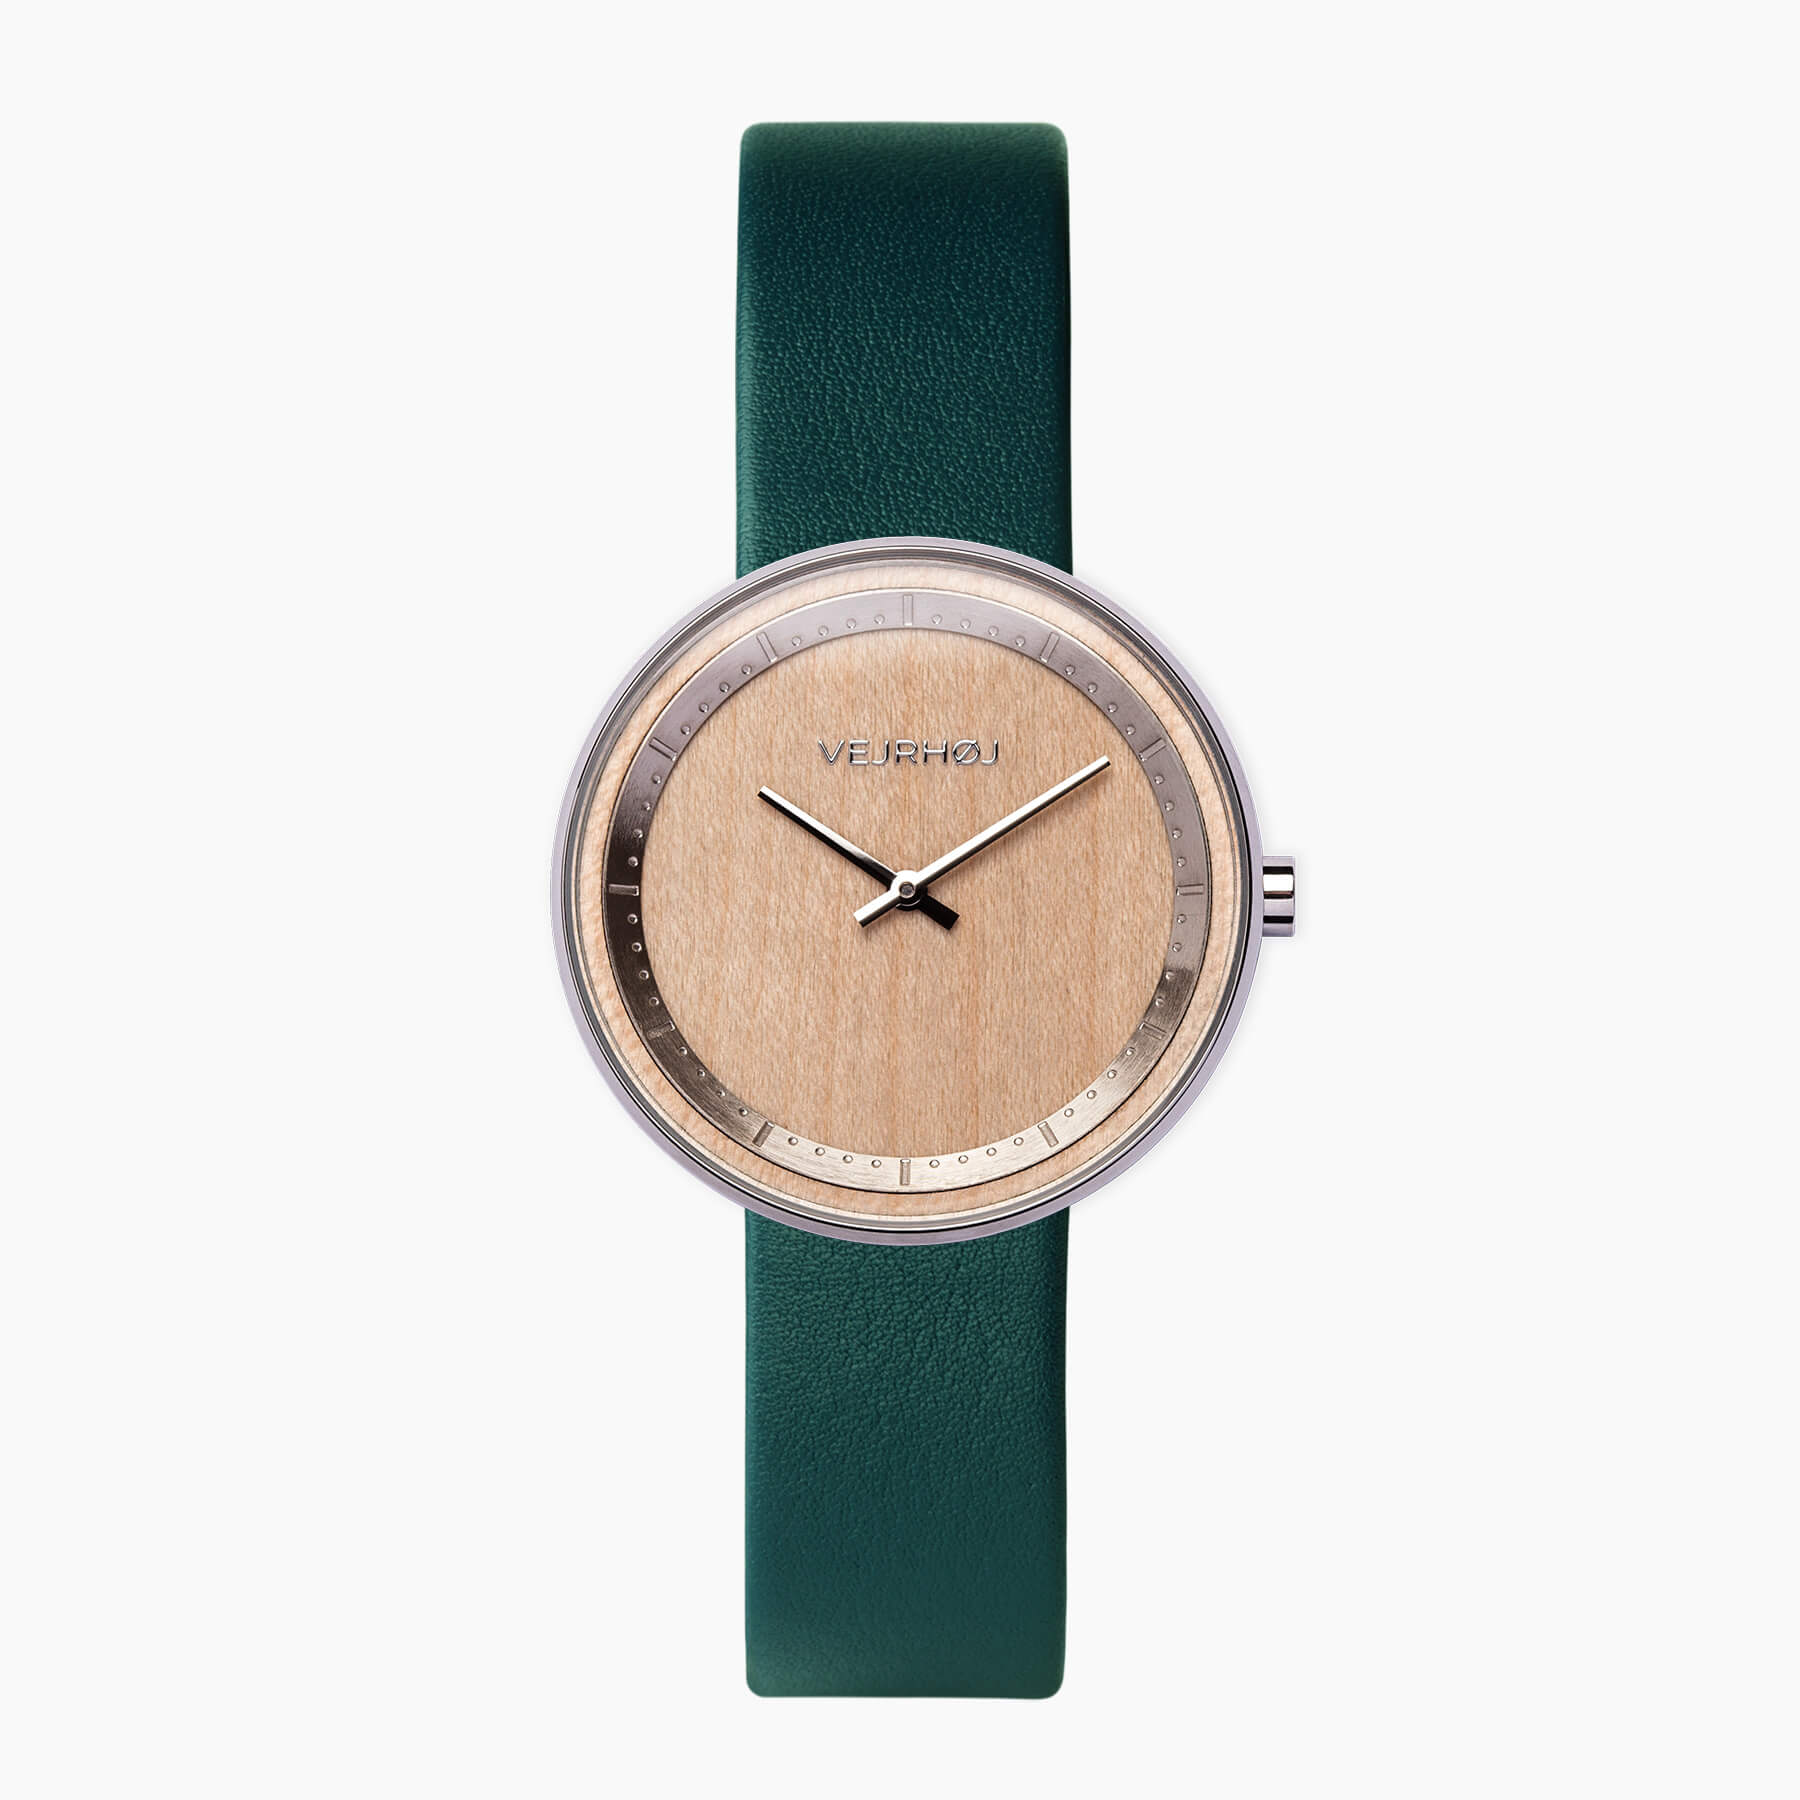 Wooden watch with silver casing and green straps